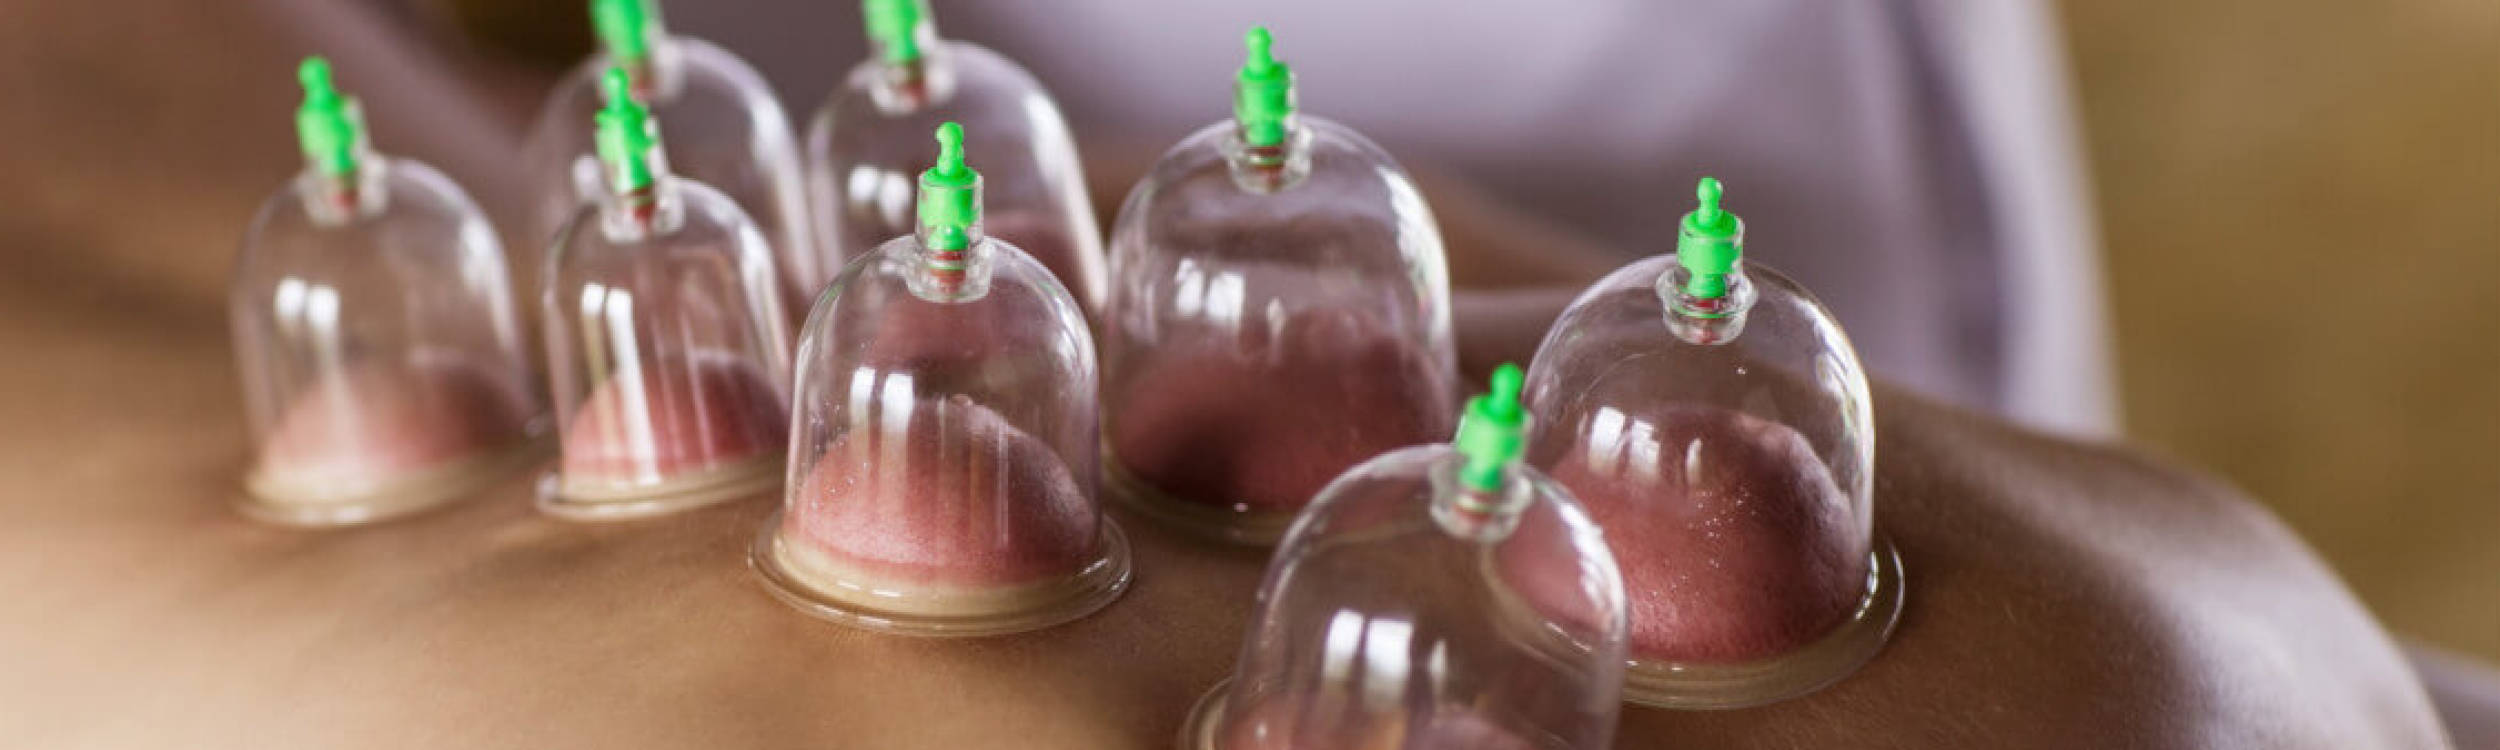 Cupping Therapy for Myofascial Release